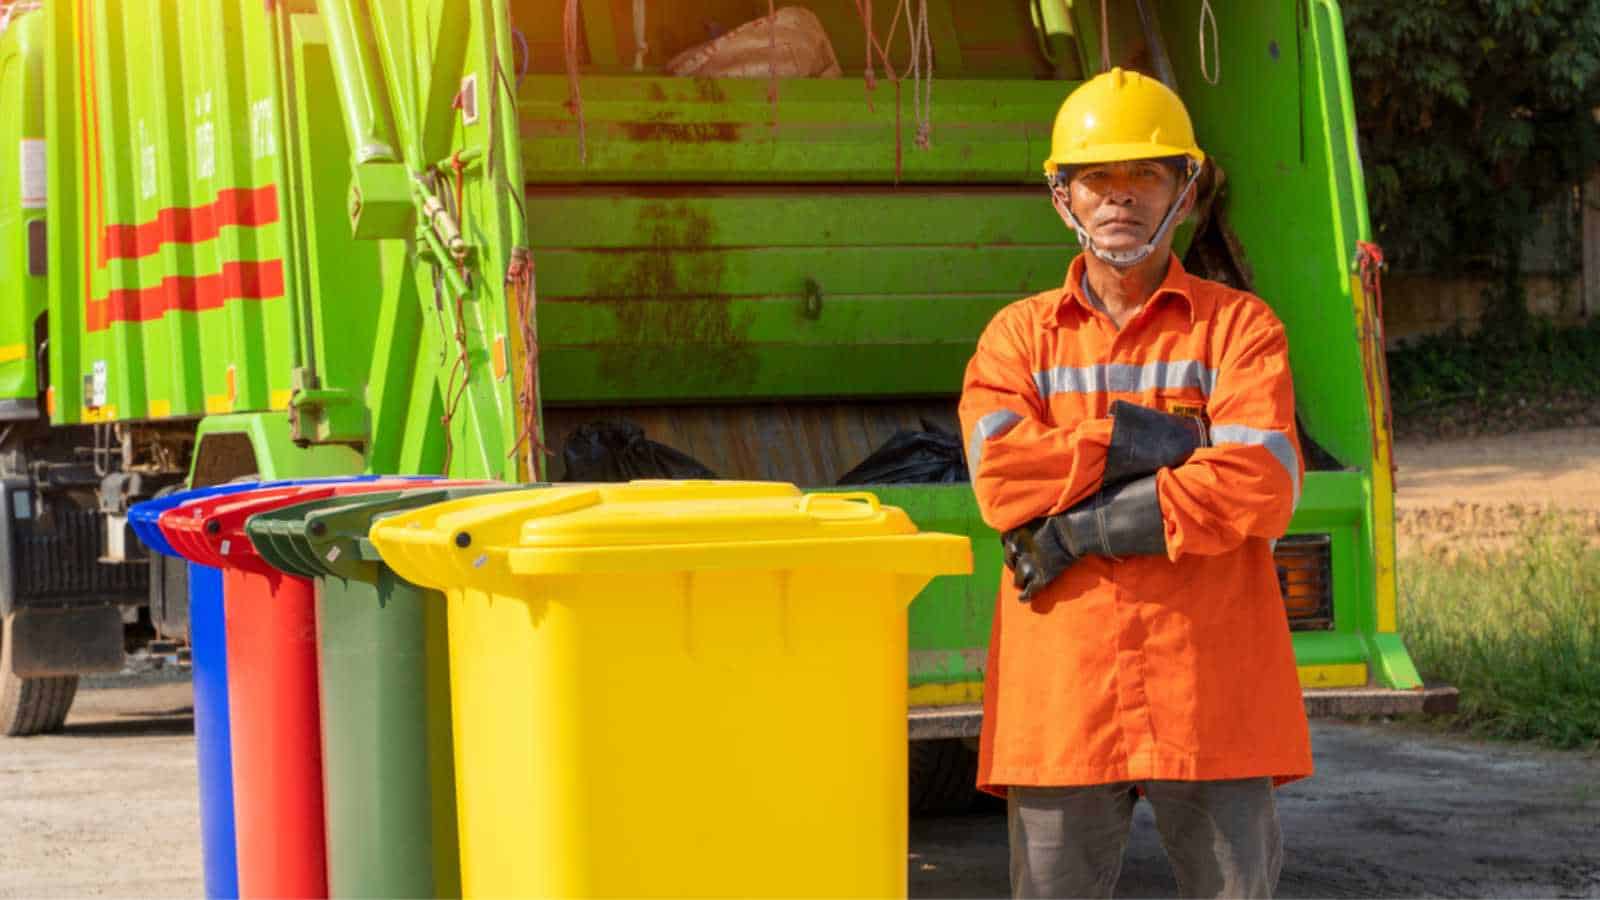 Portrait of garbage collector with truck loading waste and trash bin.